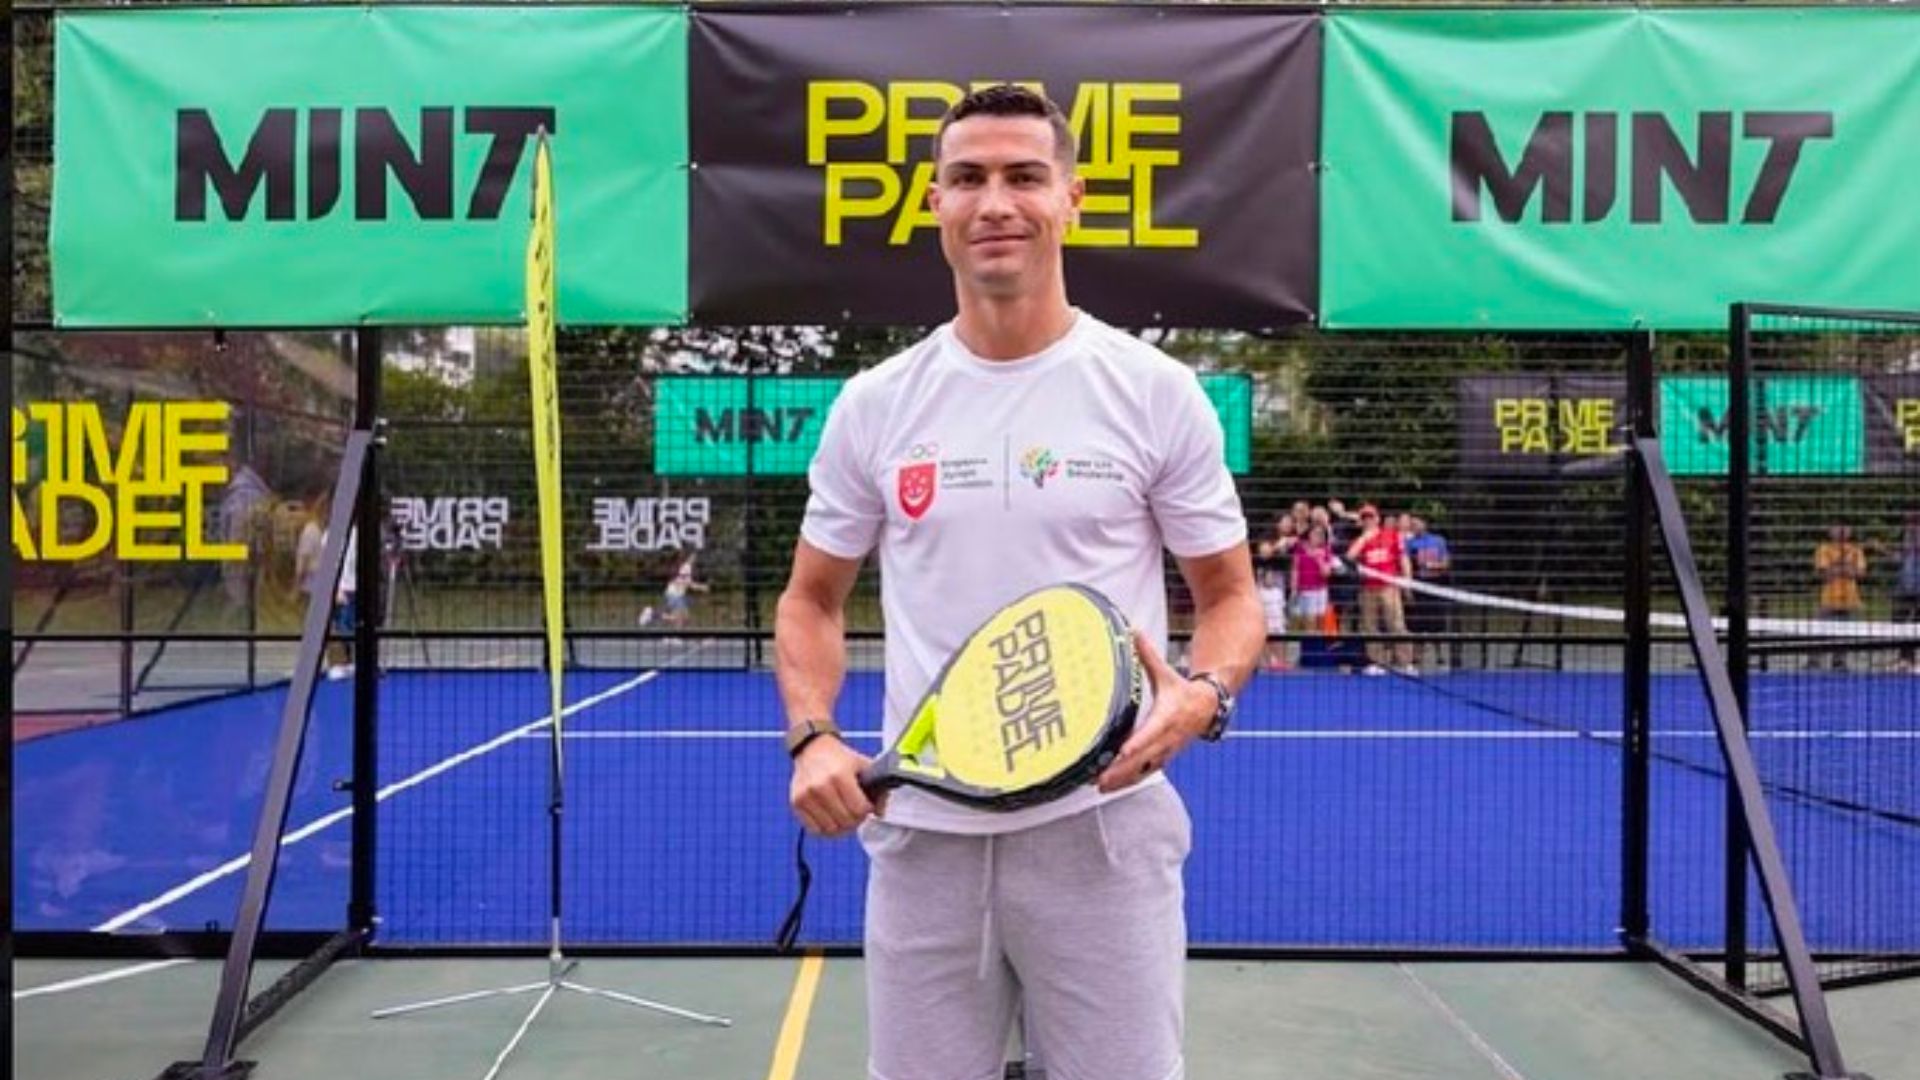 Portugal Padel: $5M Investment From Soccer Star Cristiano Ronaldo